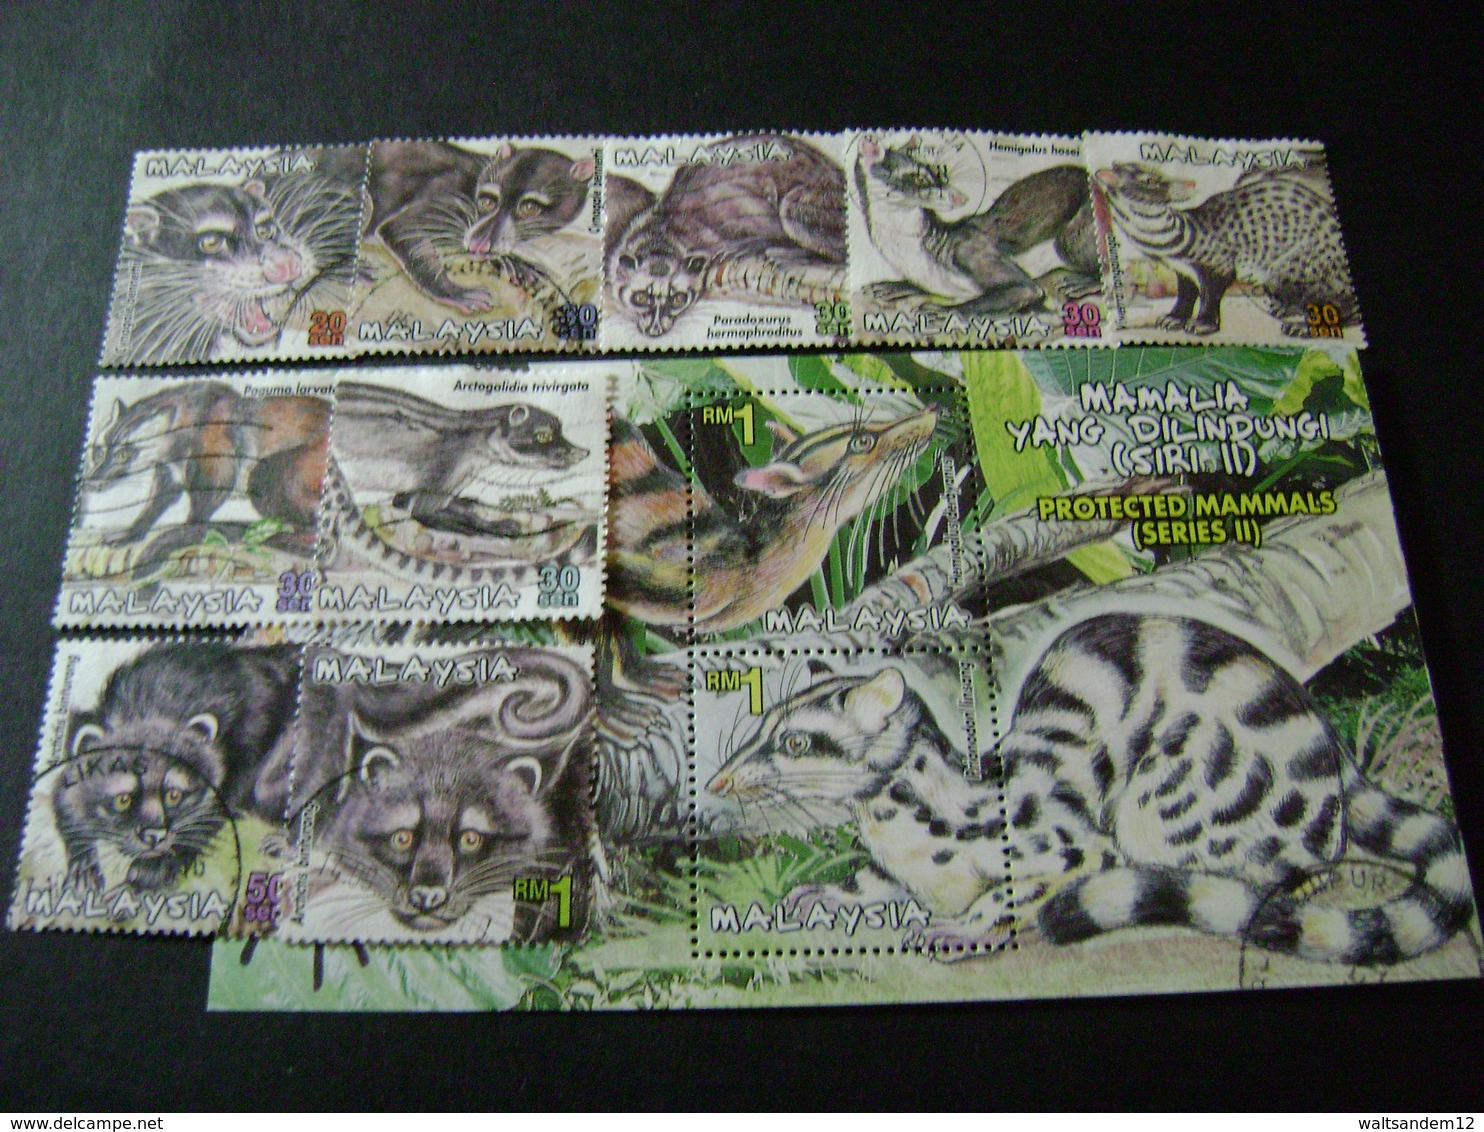 Malaysia 2000 stamp issues (between SG 840 and 969 - see description) 9 images - Used